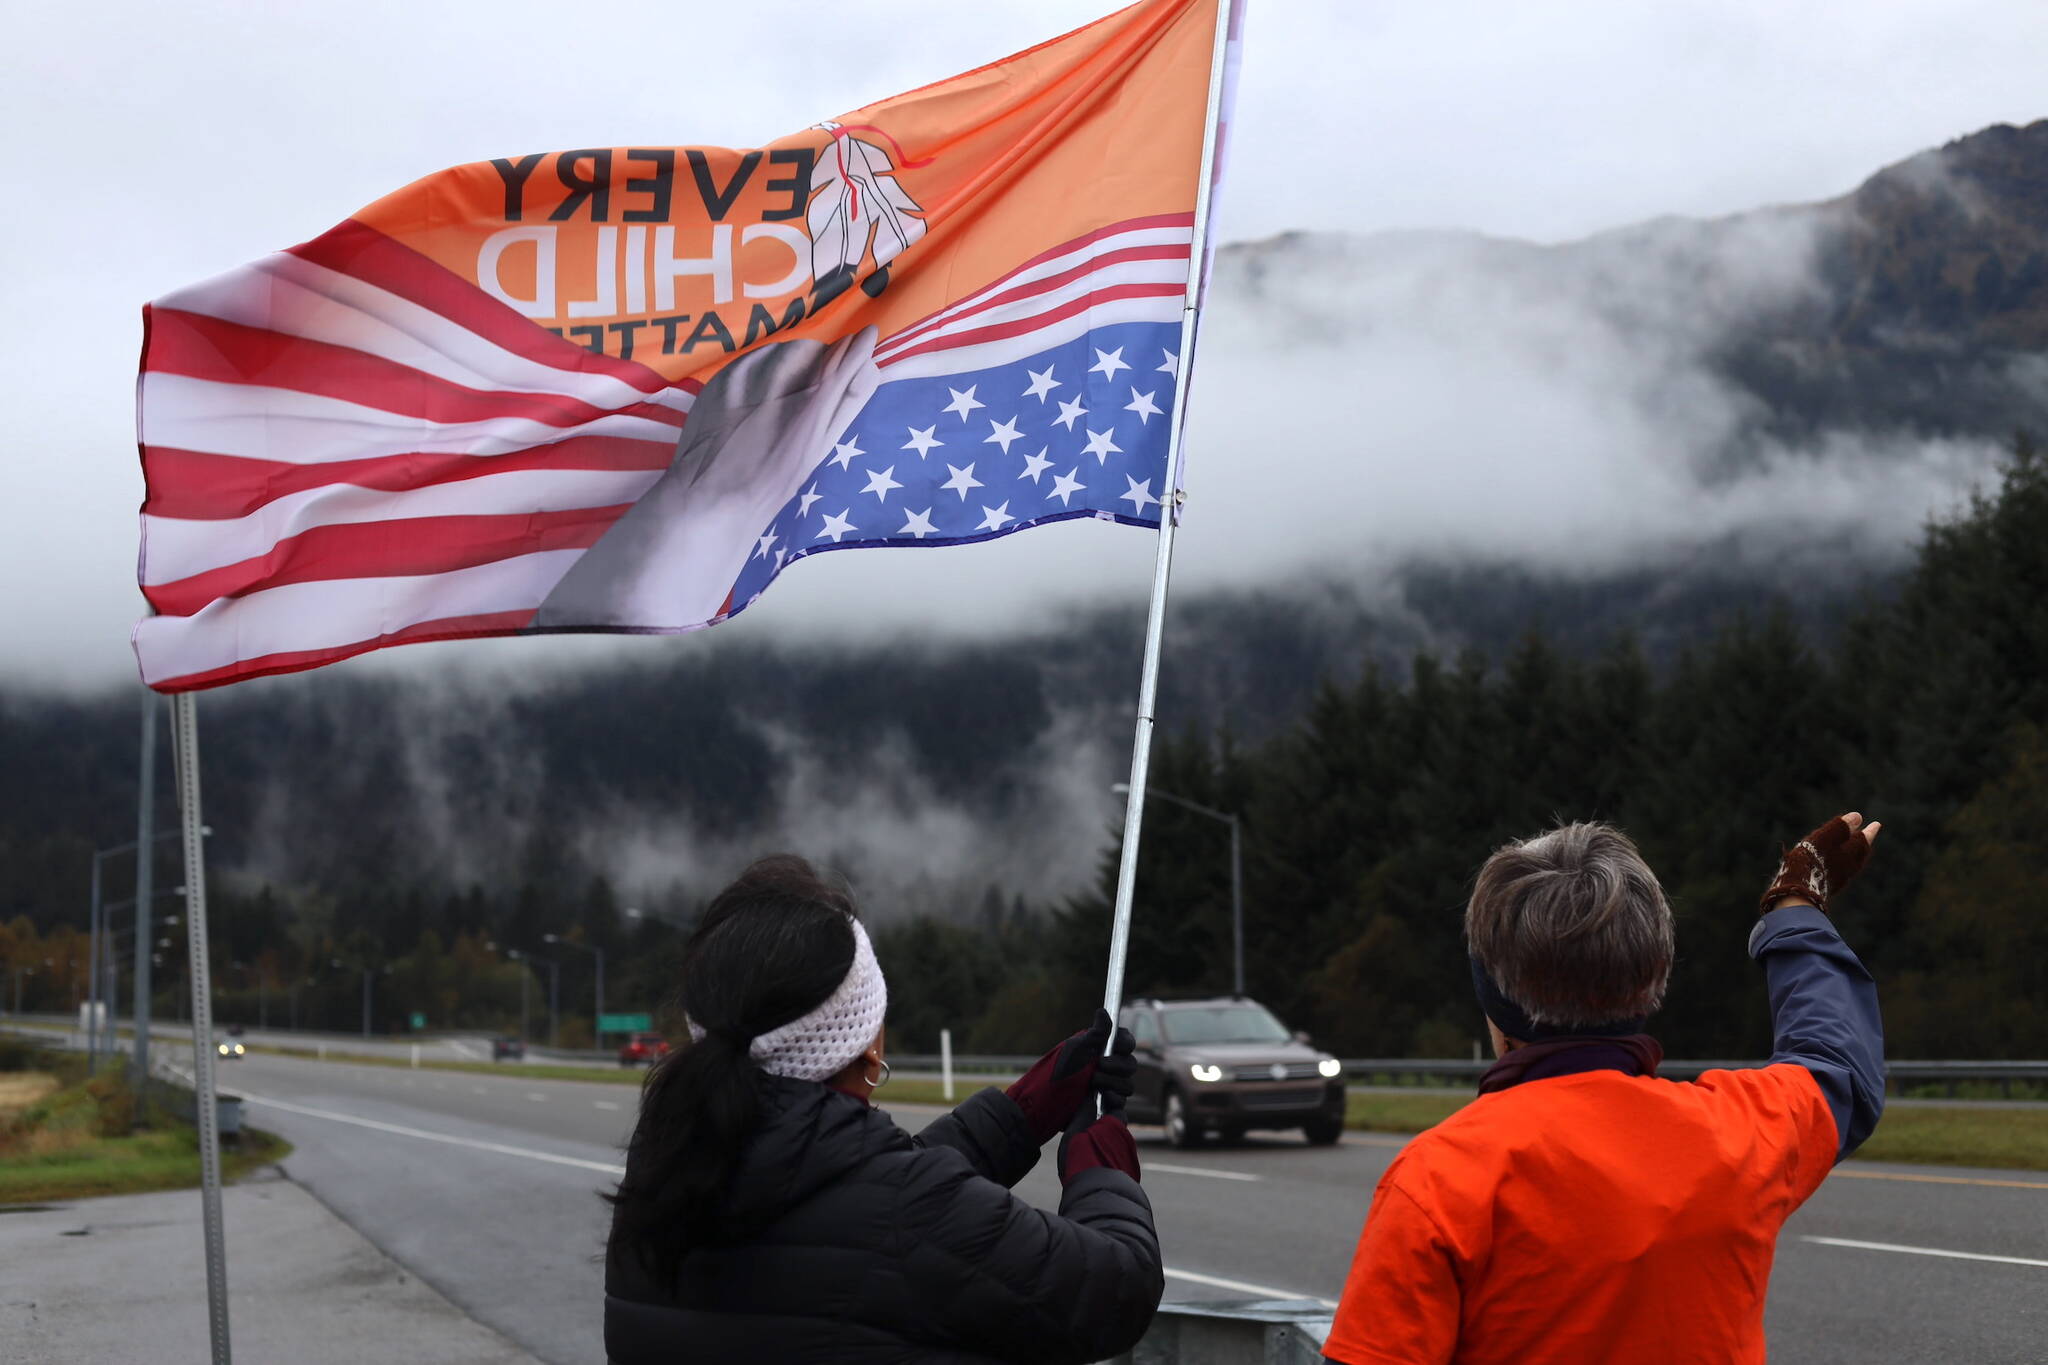 Residents wave a flag that reads “Every Child Matters” as cars pass by on Glacier Highway near the Mendenhall Wetlands viewing area in Juneau on Saturday morning during an Orange Shirt Day event. (Clarise Larson / Juneau Empire)